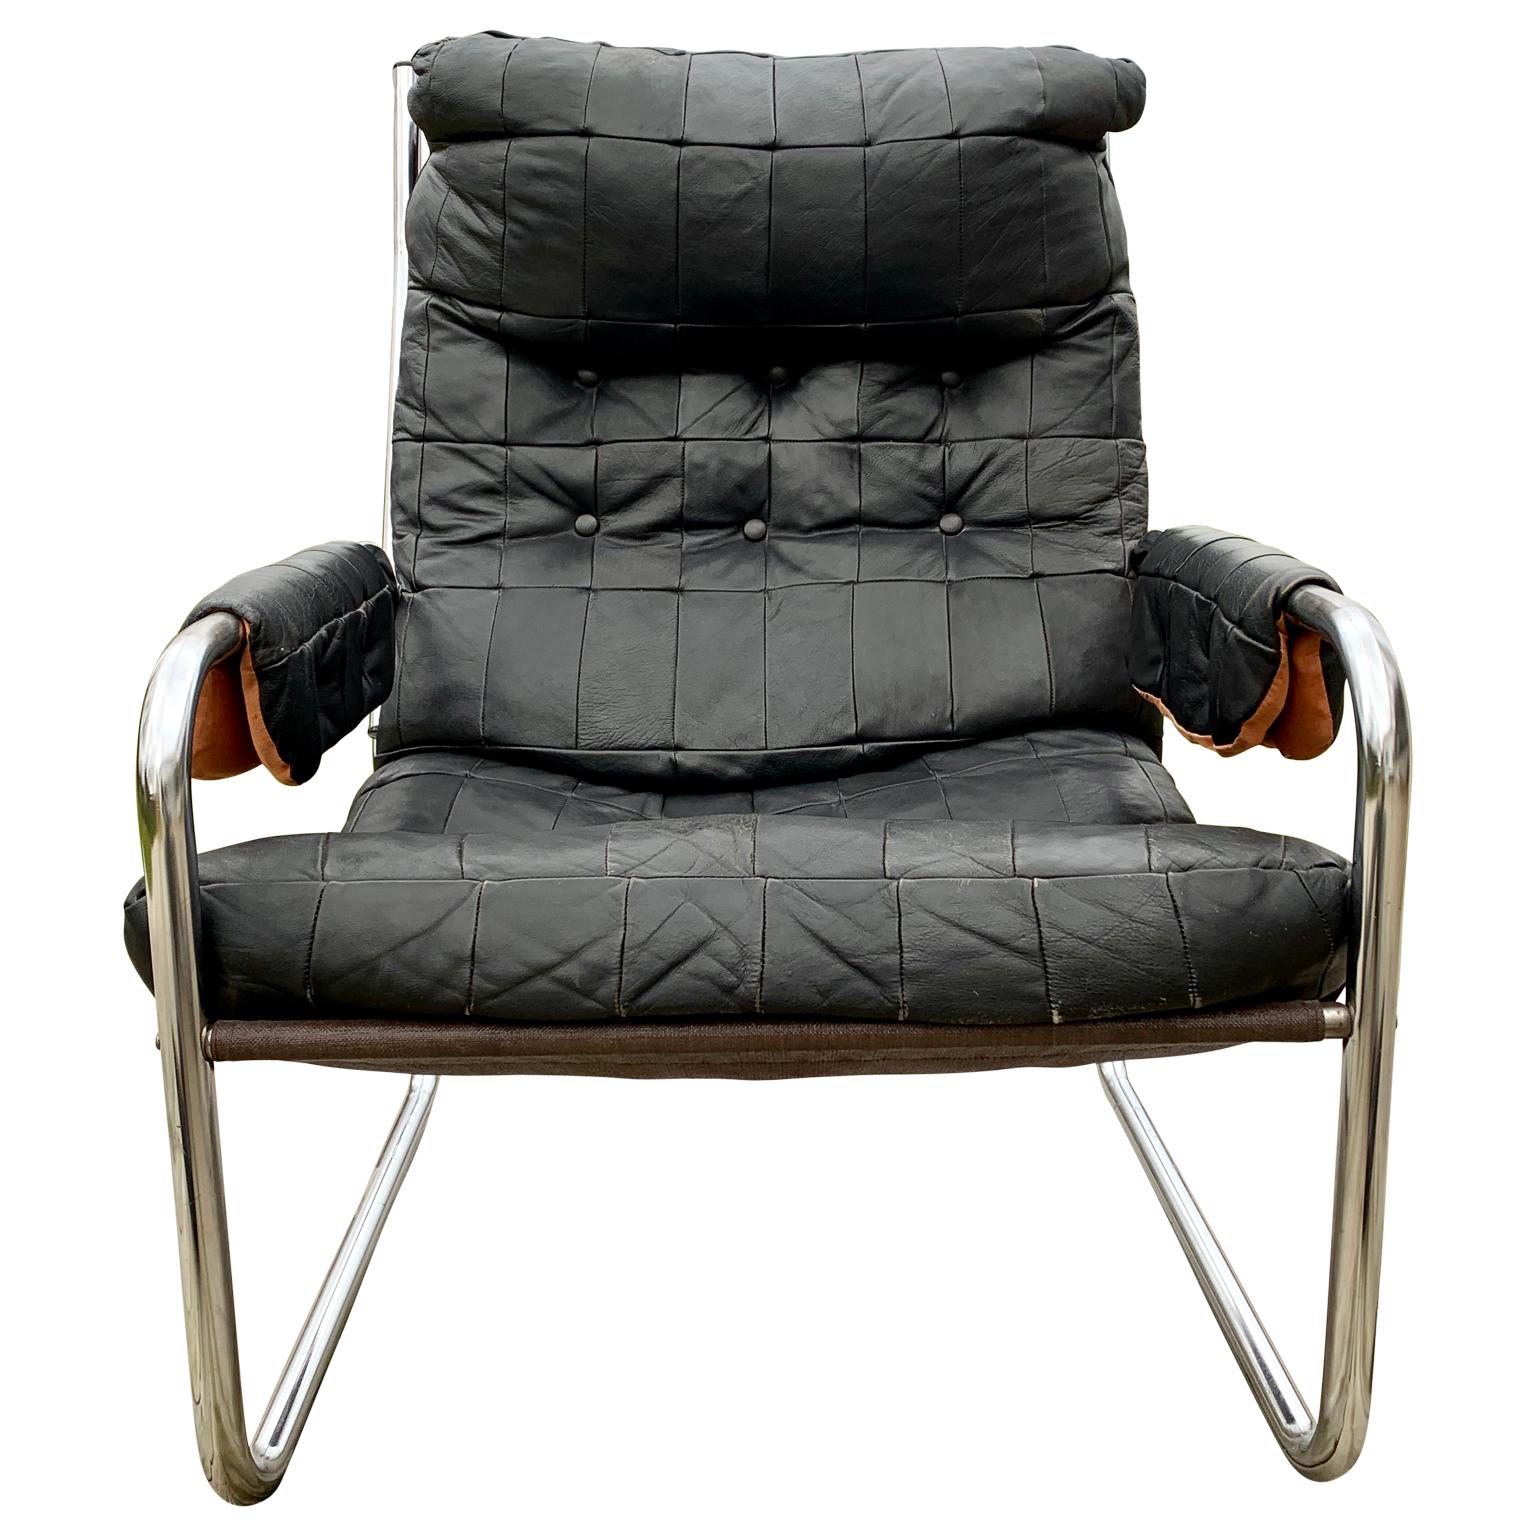 Scandinavian Mid-Century Modern leather and chrome armchair, circa 1970s
 
Please note that this armchair is located in Halmstad, Sweden.
Complementary delivery to most areas of London UK, The Netherlands, Belgium, Denmark and Northern Germany.